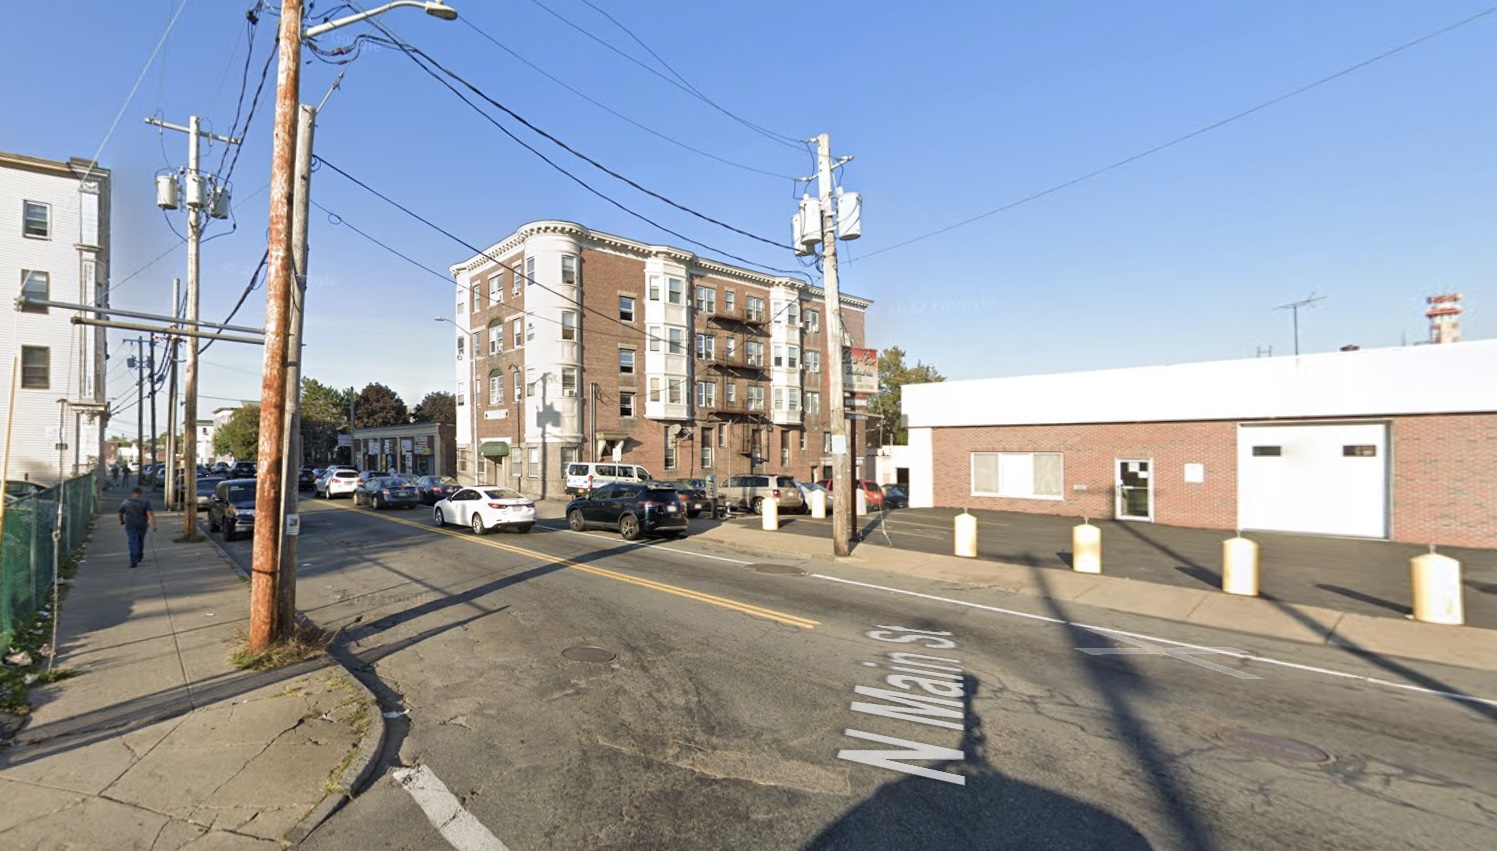 A Google Street View image of a street corner with several multi-story apartment buildings in the distance. In the foreground is a single-story commercial building set back from the street behind a parking lot.